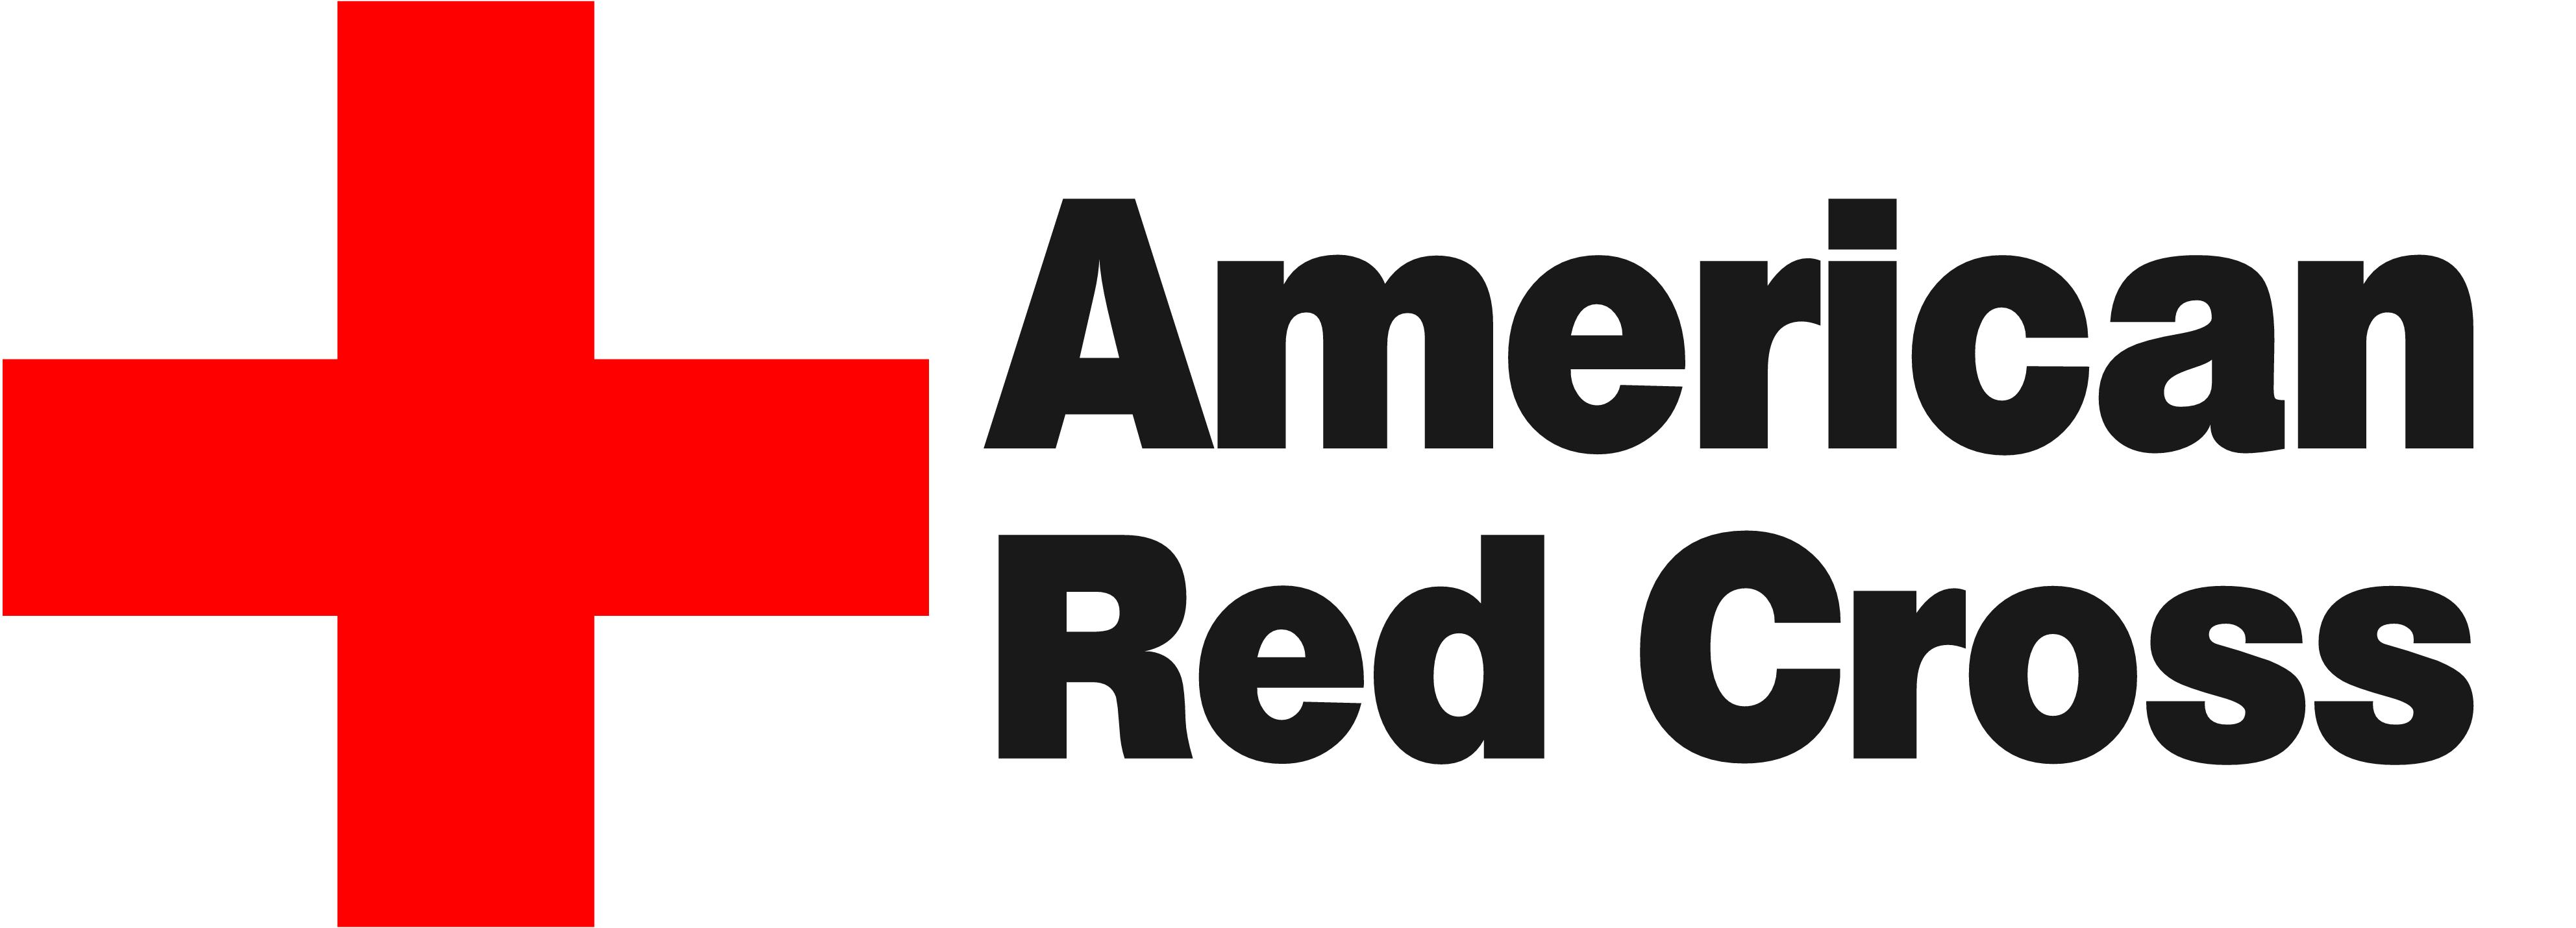 Big Picture of American Red Cross Logo - Red Cross Apologizes For “Racist” Swimming Poster *PIC*